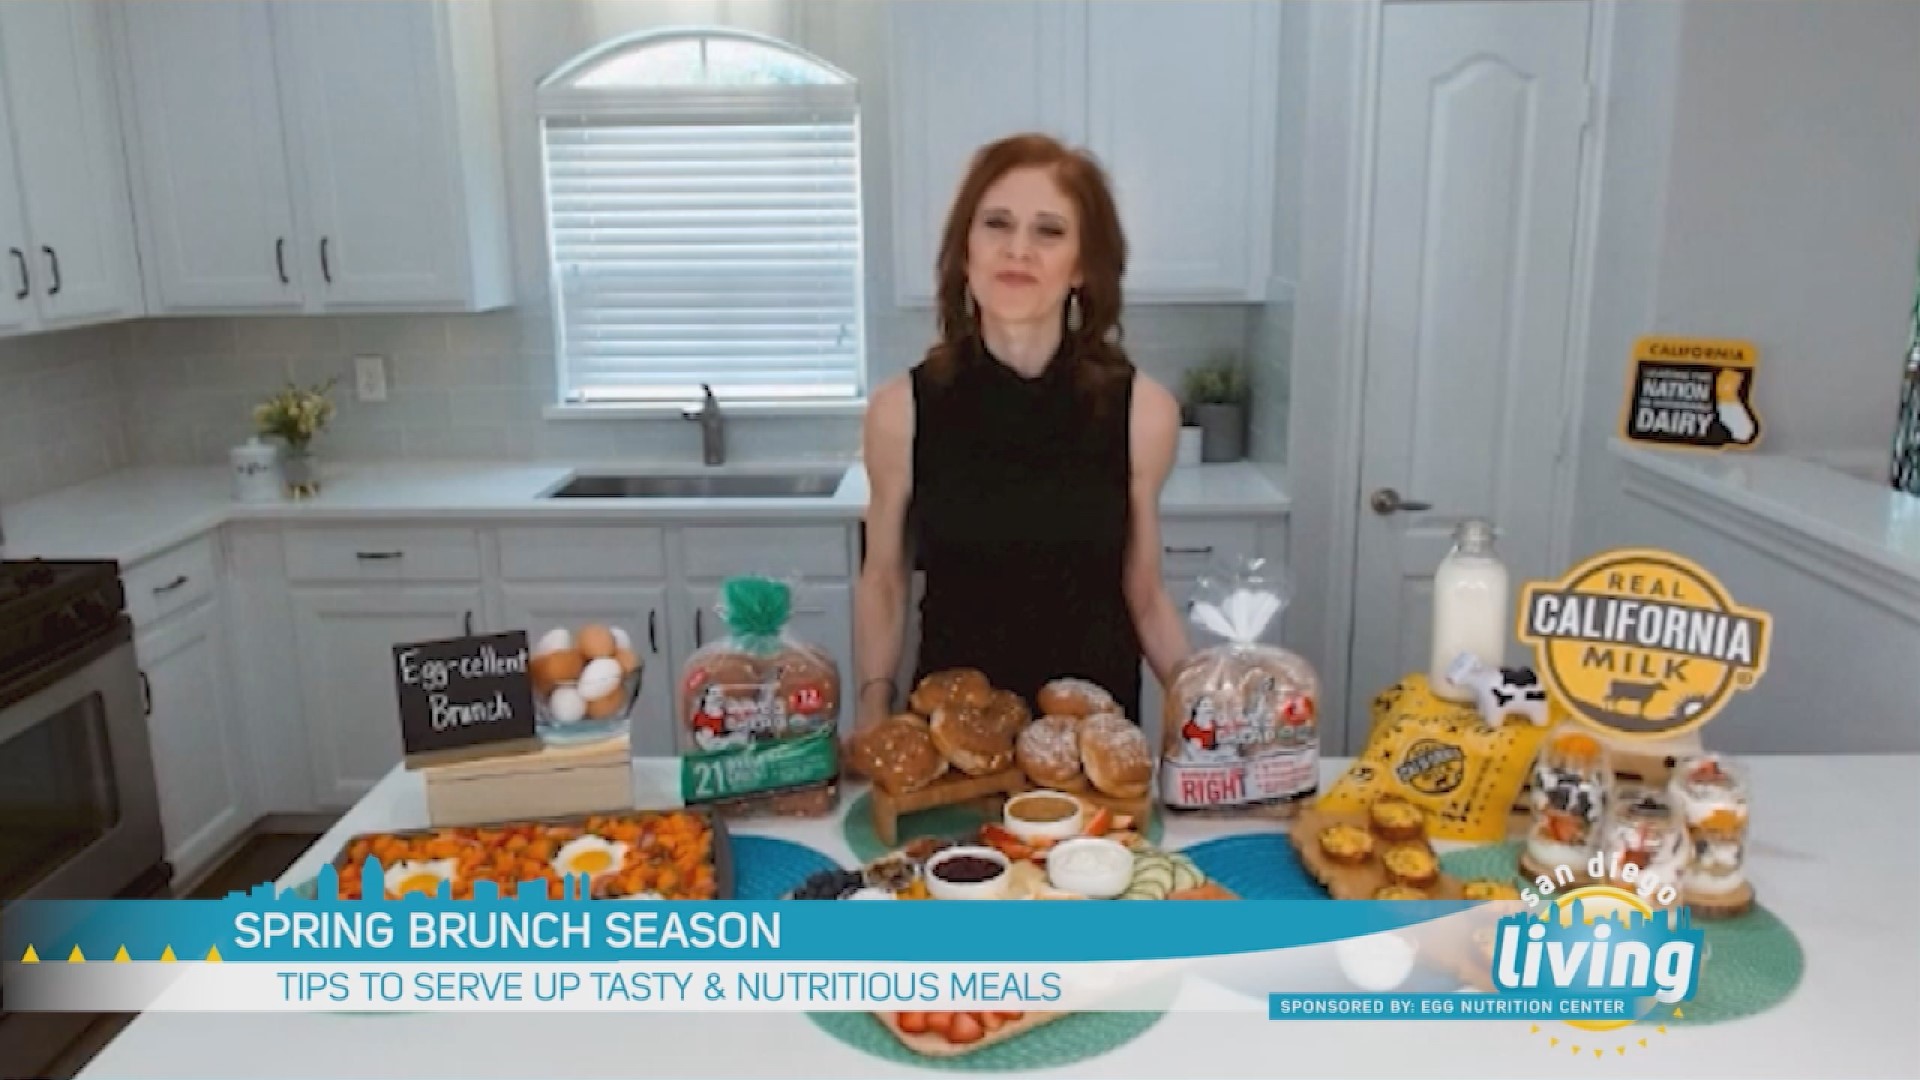 Delicious and Nutritious Recipes Your Guests Will Love. Sponsored by: Egg Nutrition Center, Dave’s Killer Bread, Real California Milk.